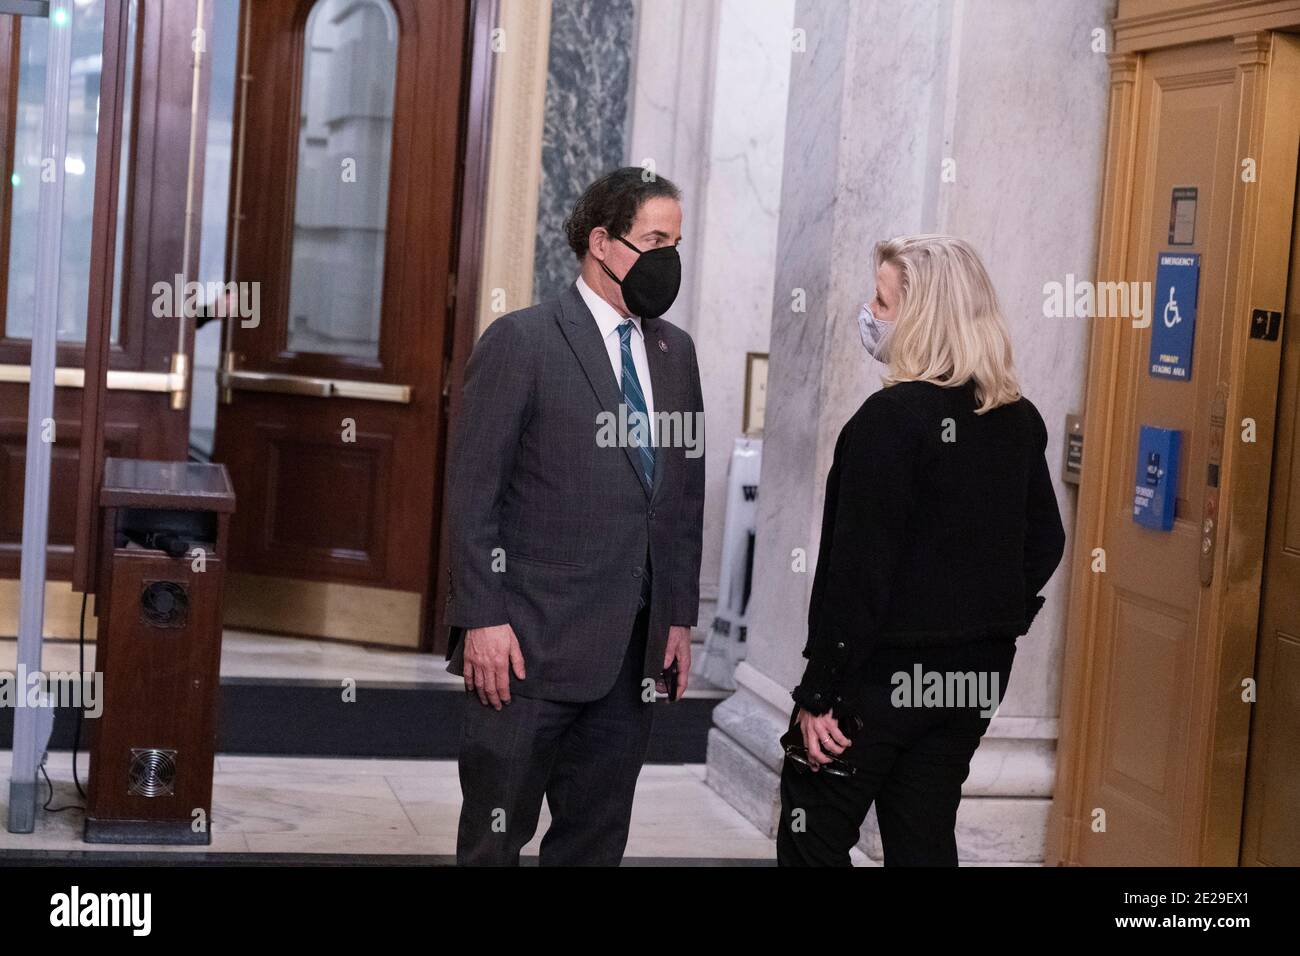 Washington DC, United States. 12th Jan, 2021. Representative Jamie Raskin (D-MD) speaks with Representative Liz Cheney(R-WY) following a vote by the House calling on Vice President Mike Pence to invoke the 25th Amendment which would President Trump from office. Photo Credit: Chris Kleponis/Sipa USA Credit: Sipa USA/Alamy Live News Stock Photo